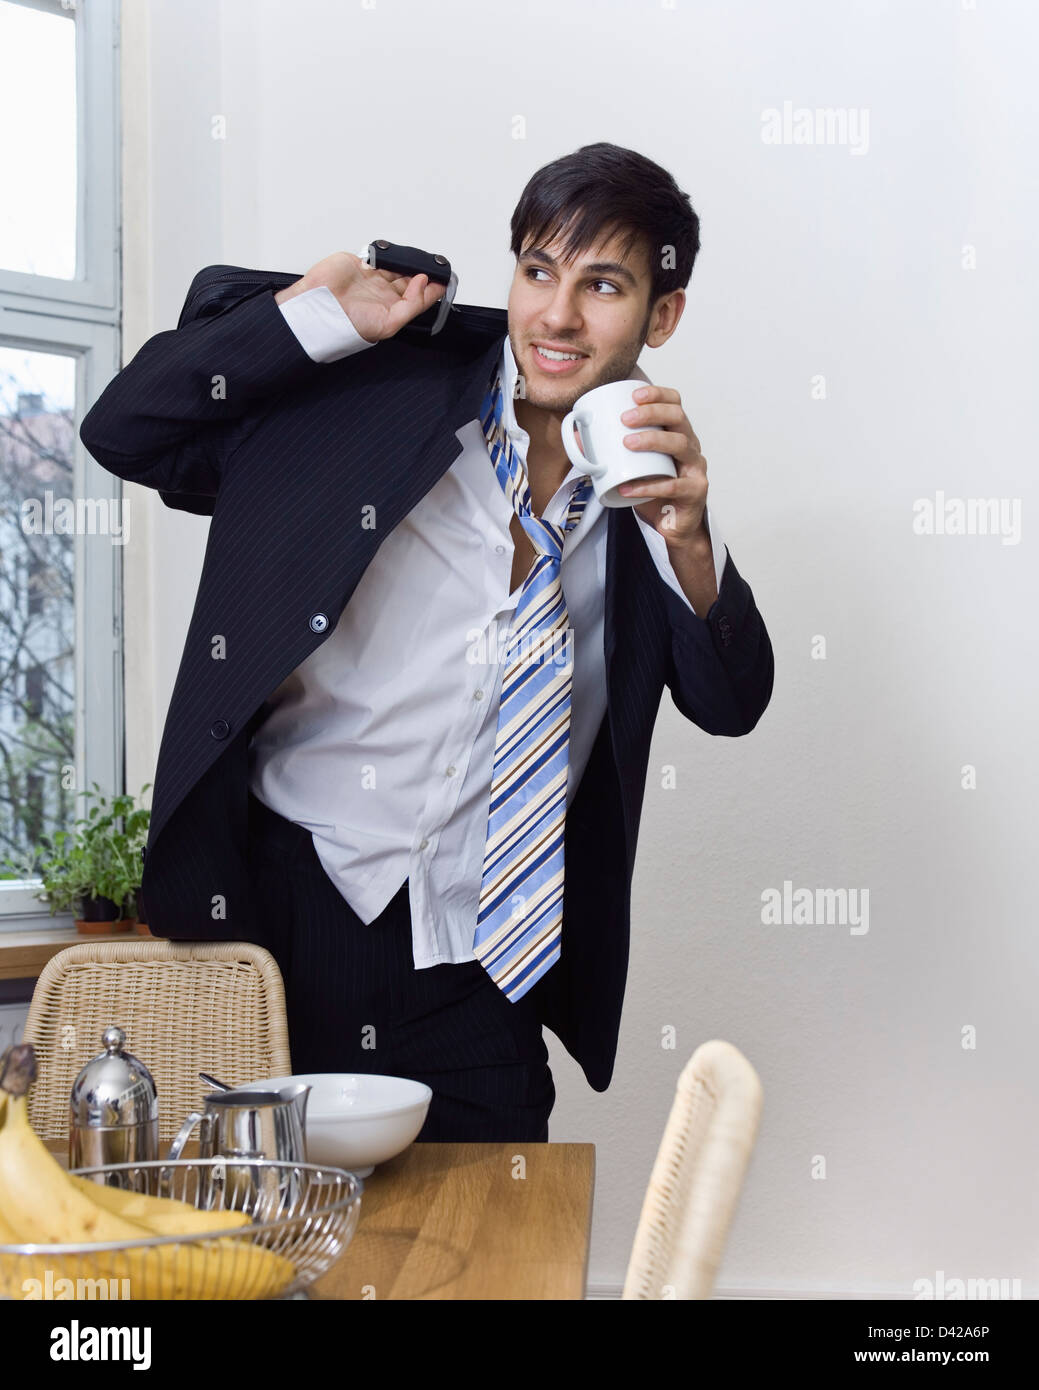 A happy suit in a hurry to go to work. Stock Photo